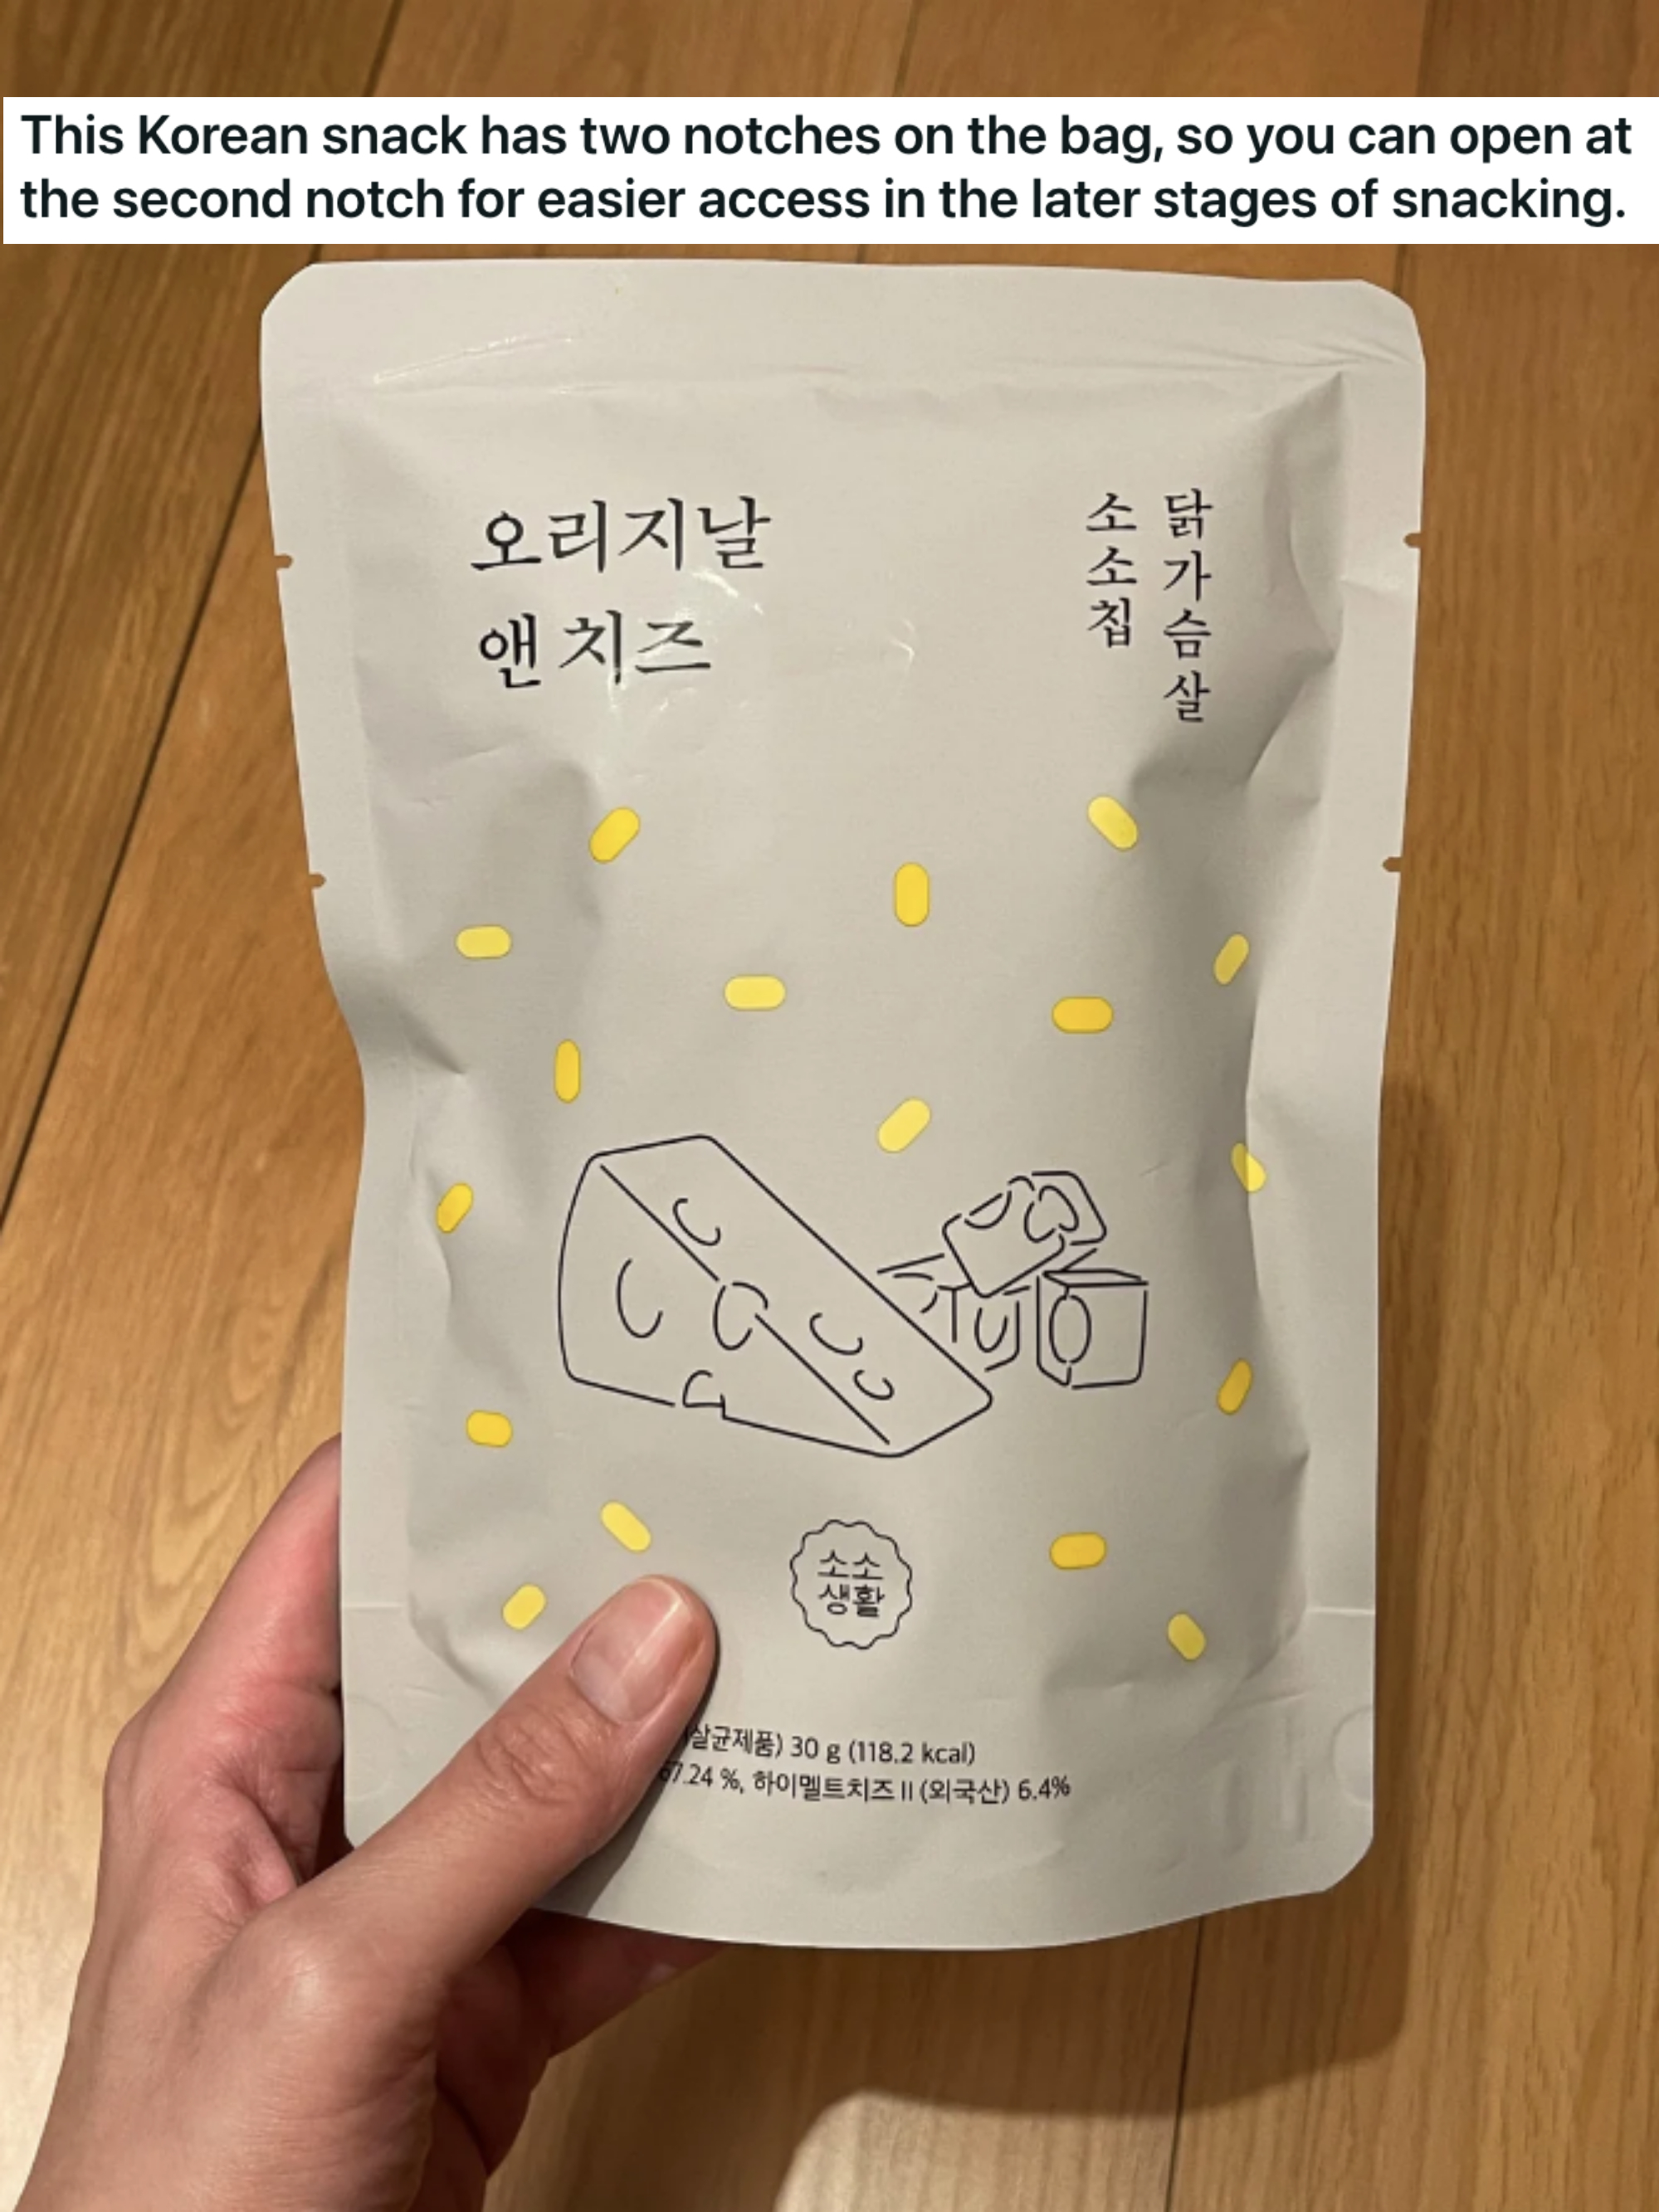 Someone holding a Korean snack